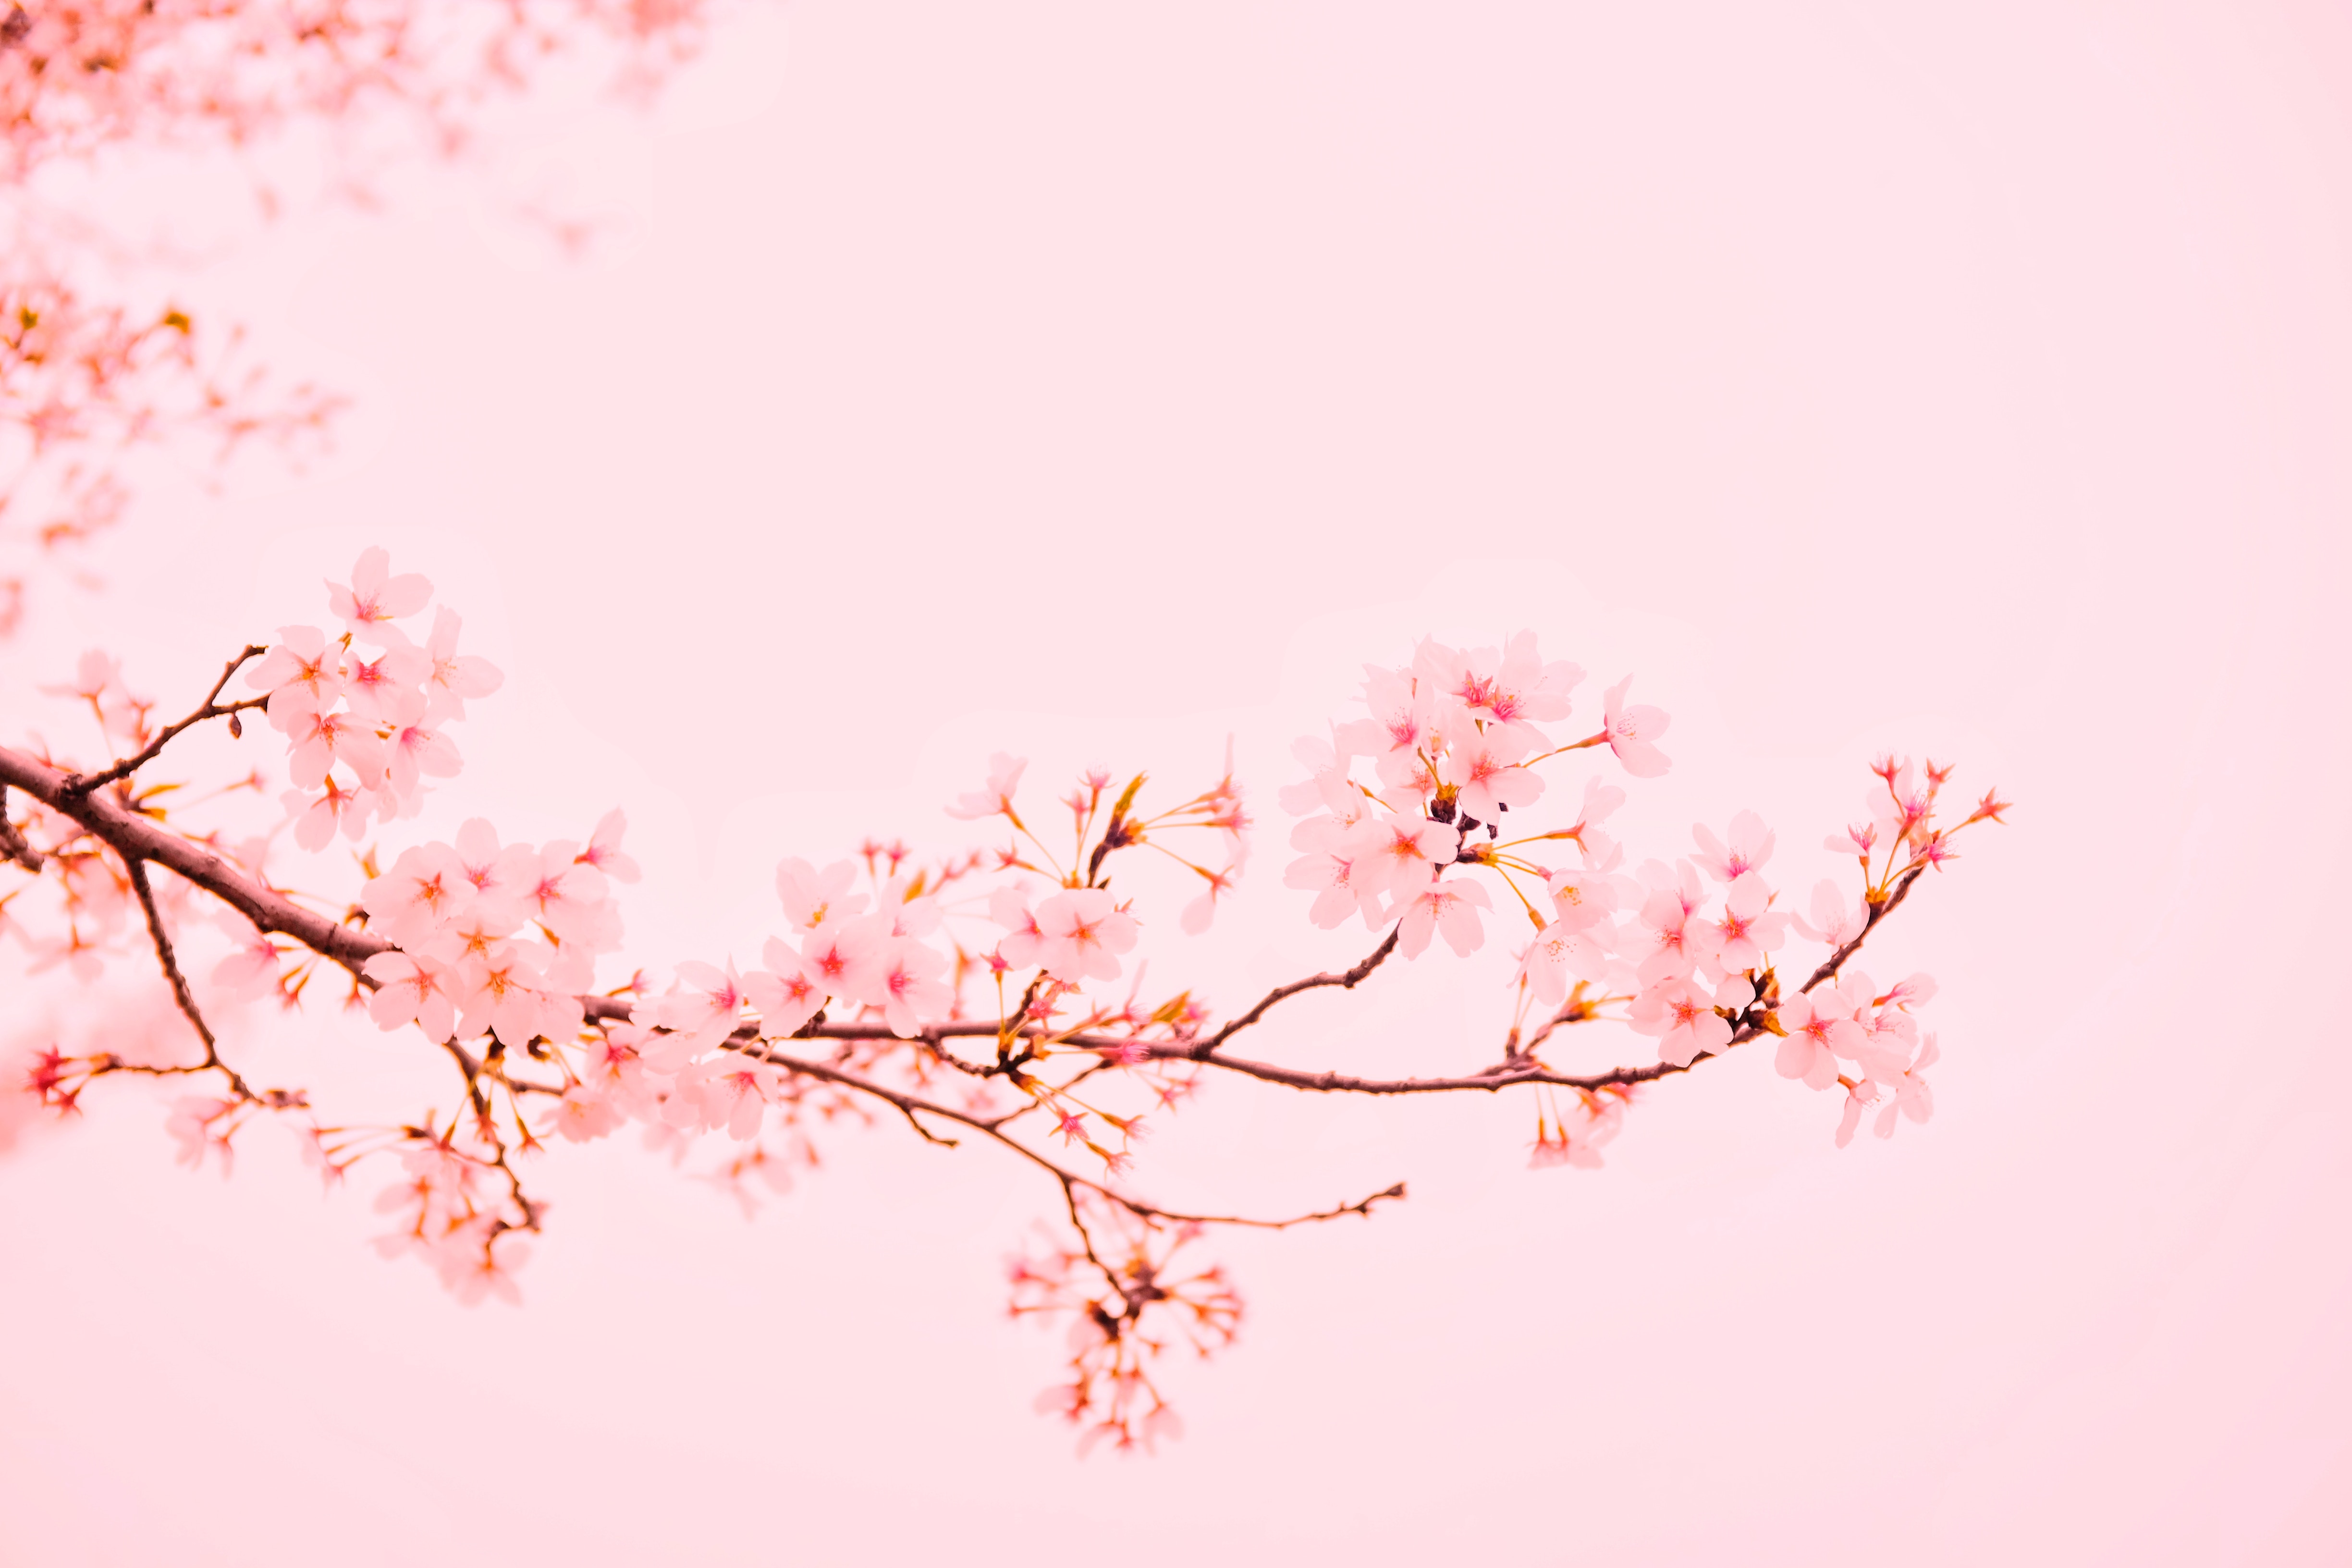 Wallpaper White Cherry Blossom in Close up Photography Background   Download Free Image